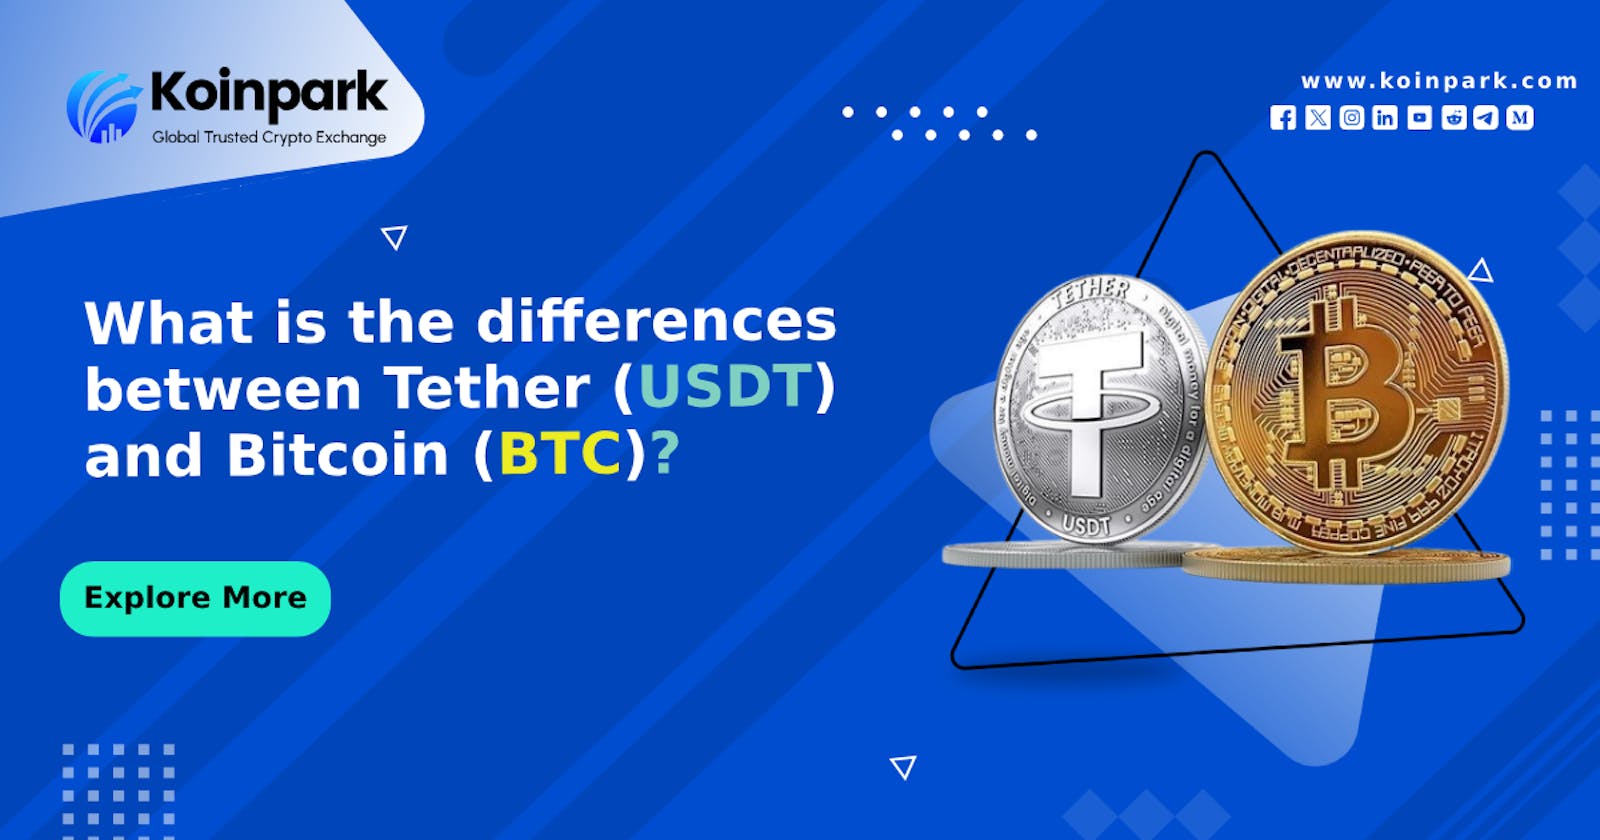 What is the difference between Tether (USDT) and Bitcoin (BTC)?